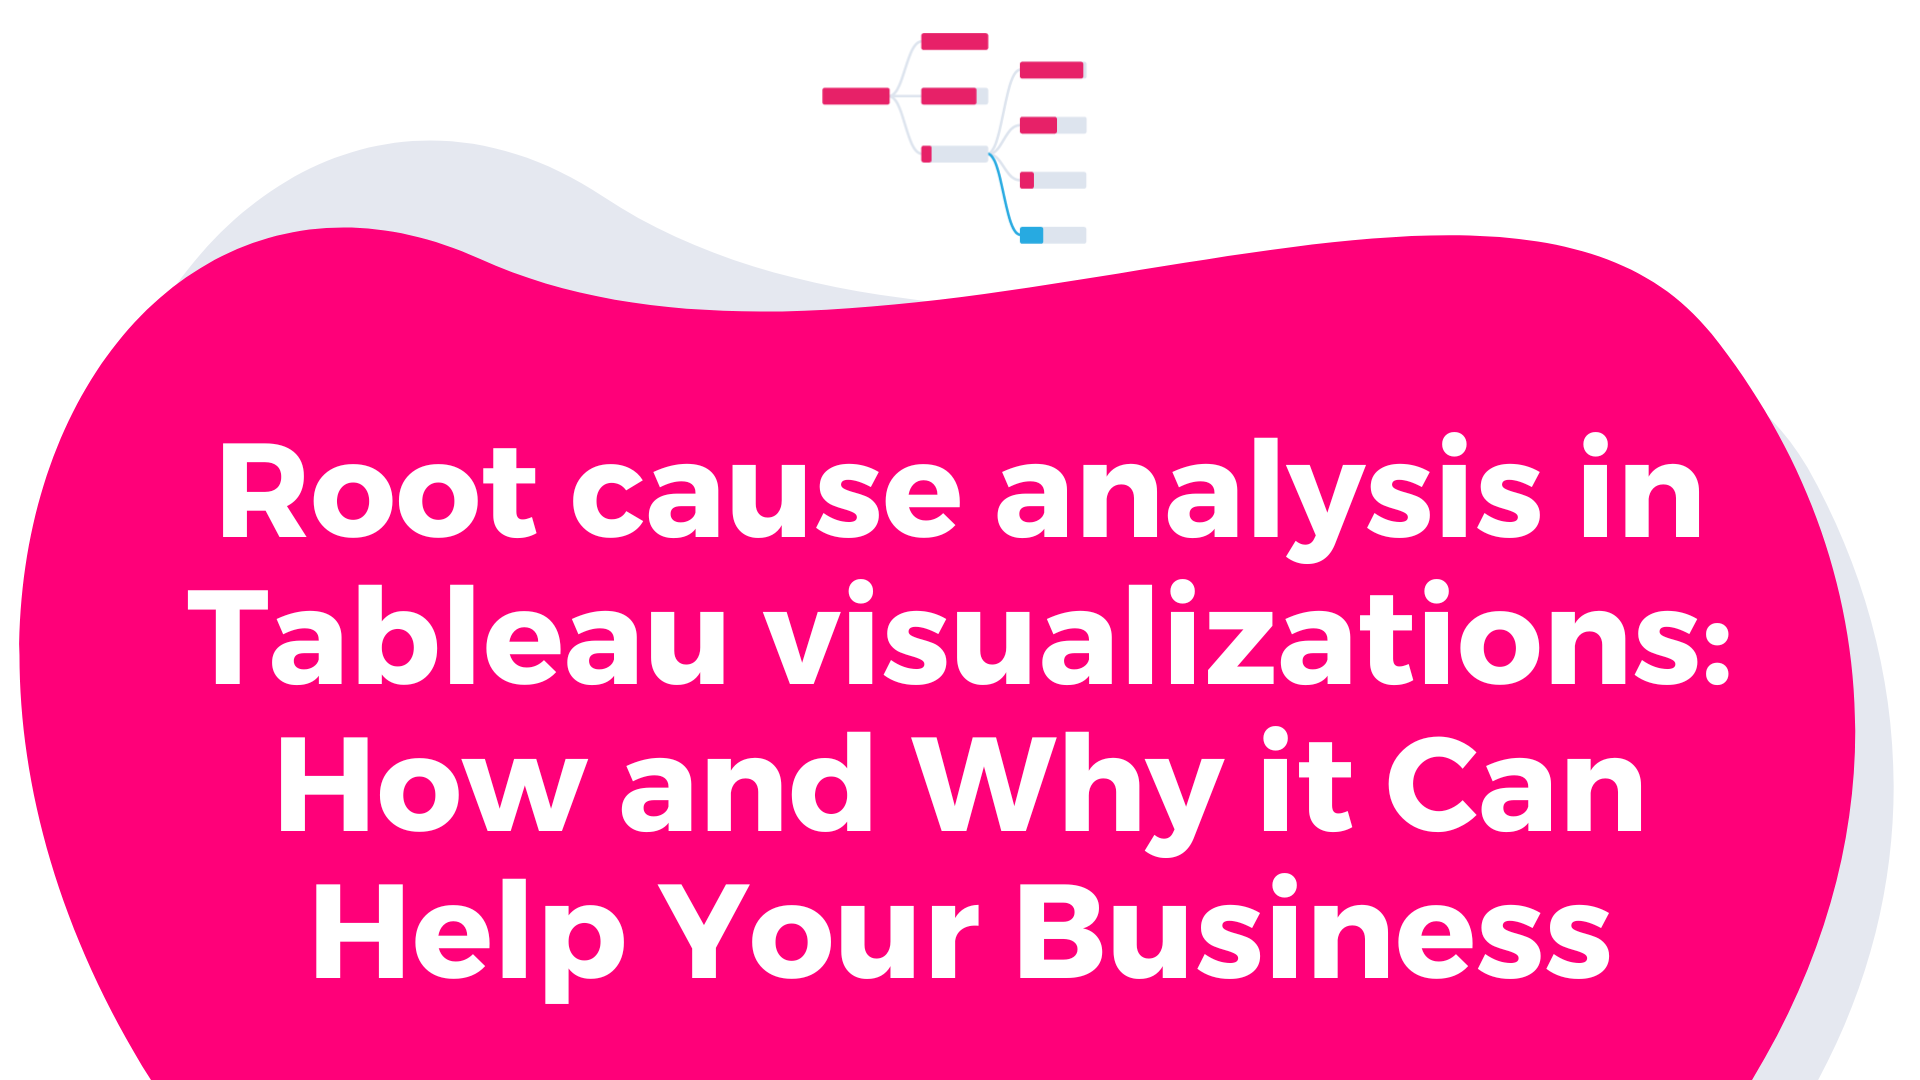 Root cause analysis in Tableau visualizations: How and Why it Can Help Your Business